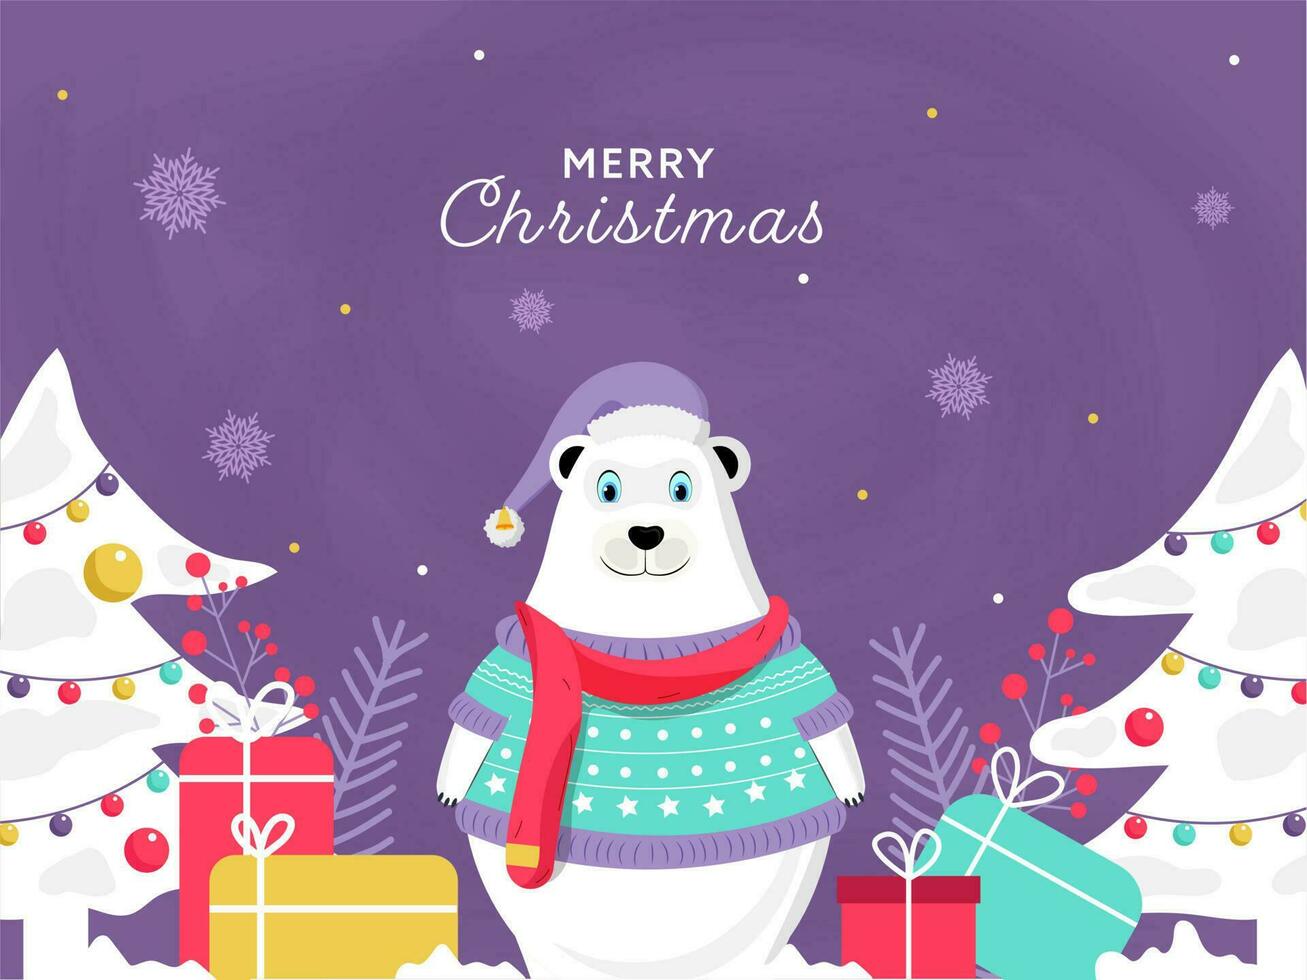 Cartoon Polar Bear Wearing Woolen Clothes With Gift Boxes And Decorative Xmas Trees On Purple Background For Merry Christmas Celebration. vector